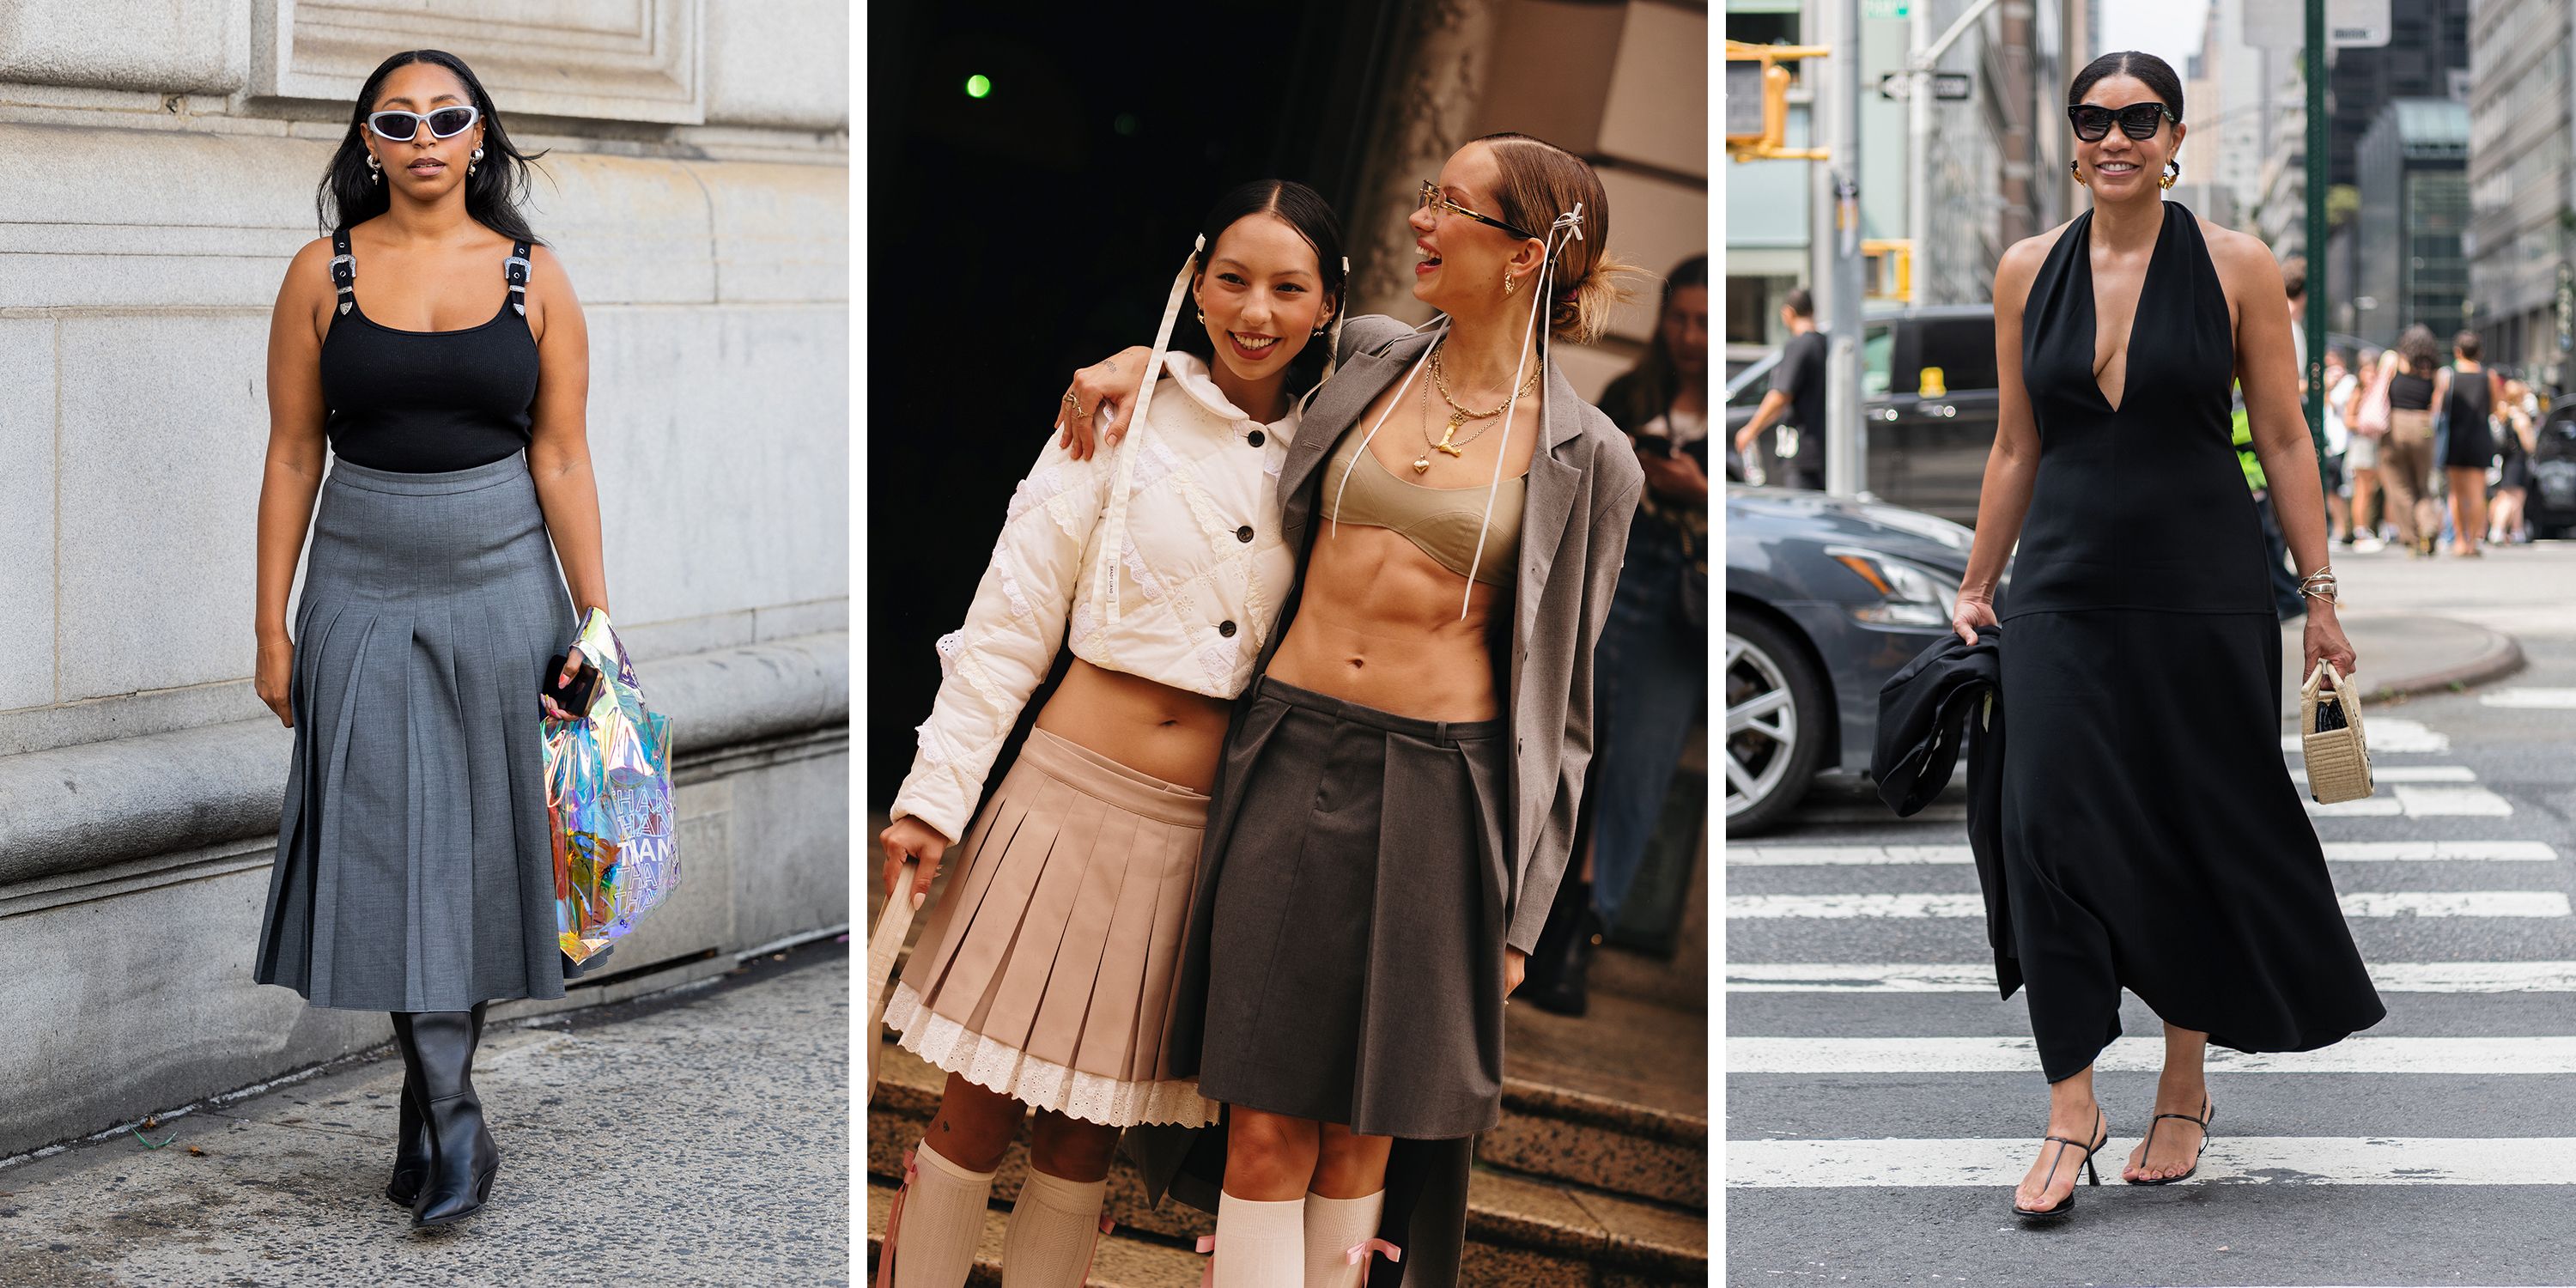 Hello Catwalk City on Instagram: Whether it's logo mania or quiet luxury,  something is always trending. If you don't have your own sense of style for  what works for you, you'll constantly